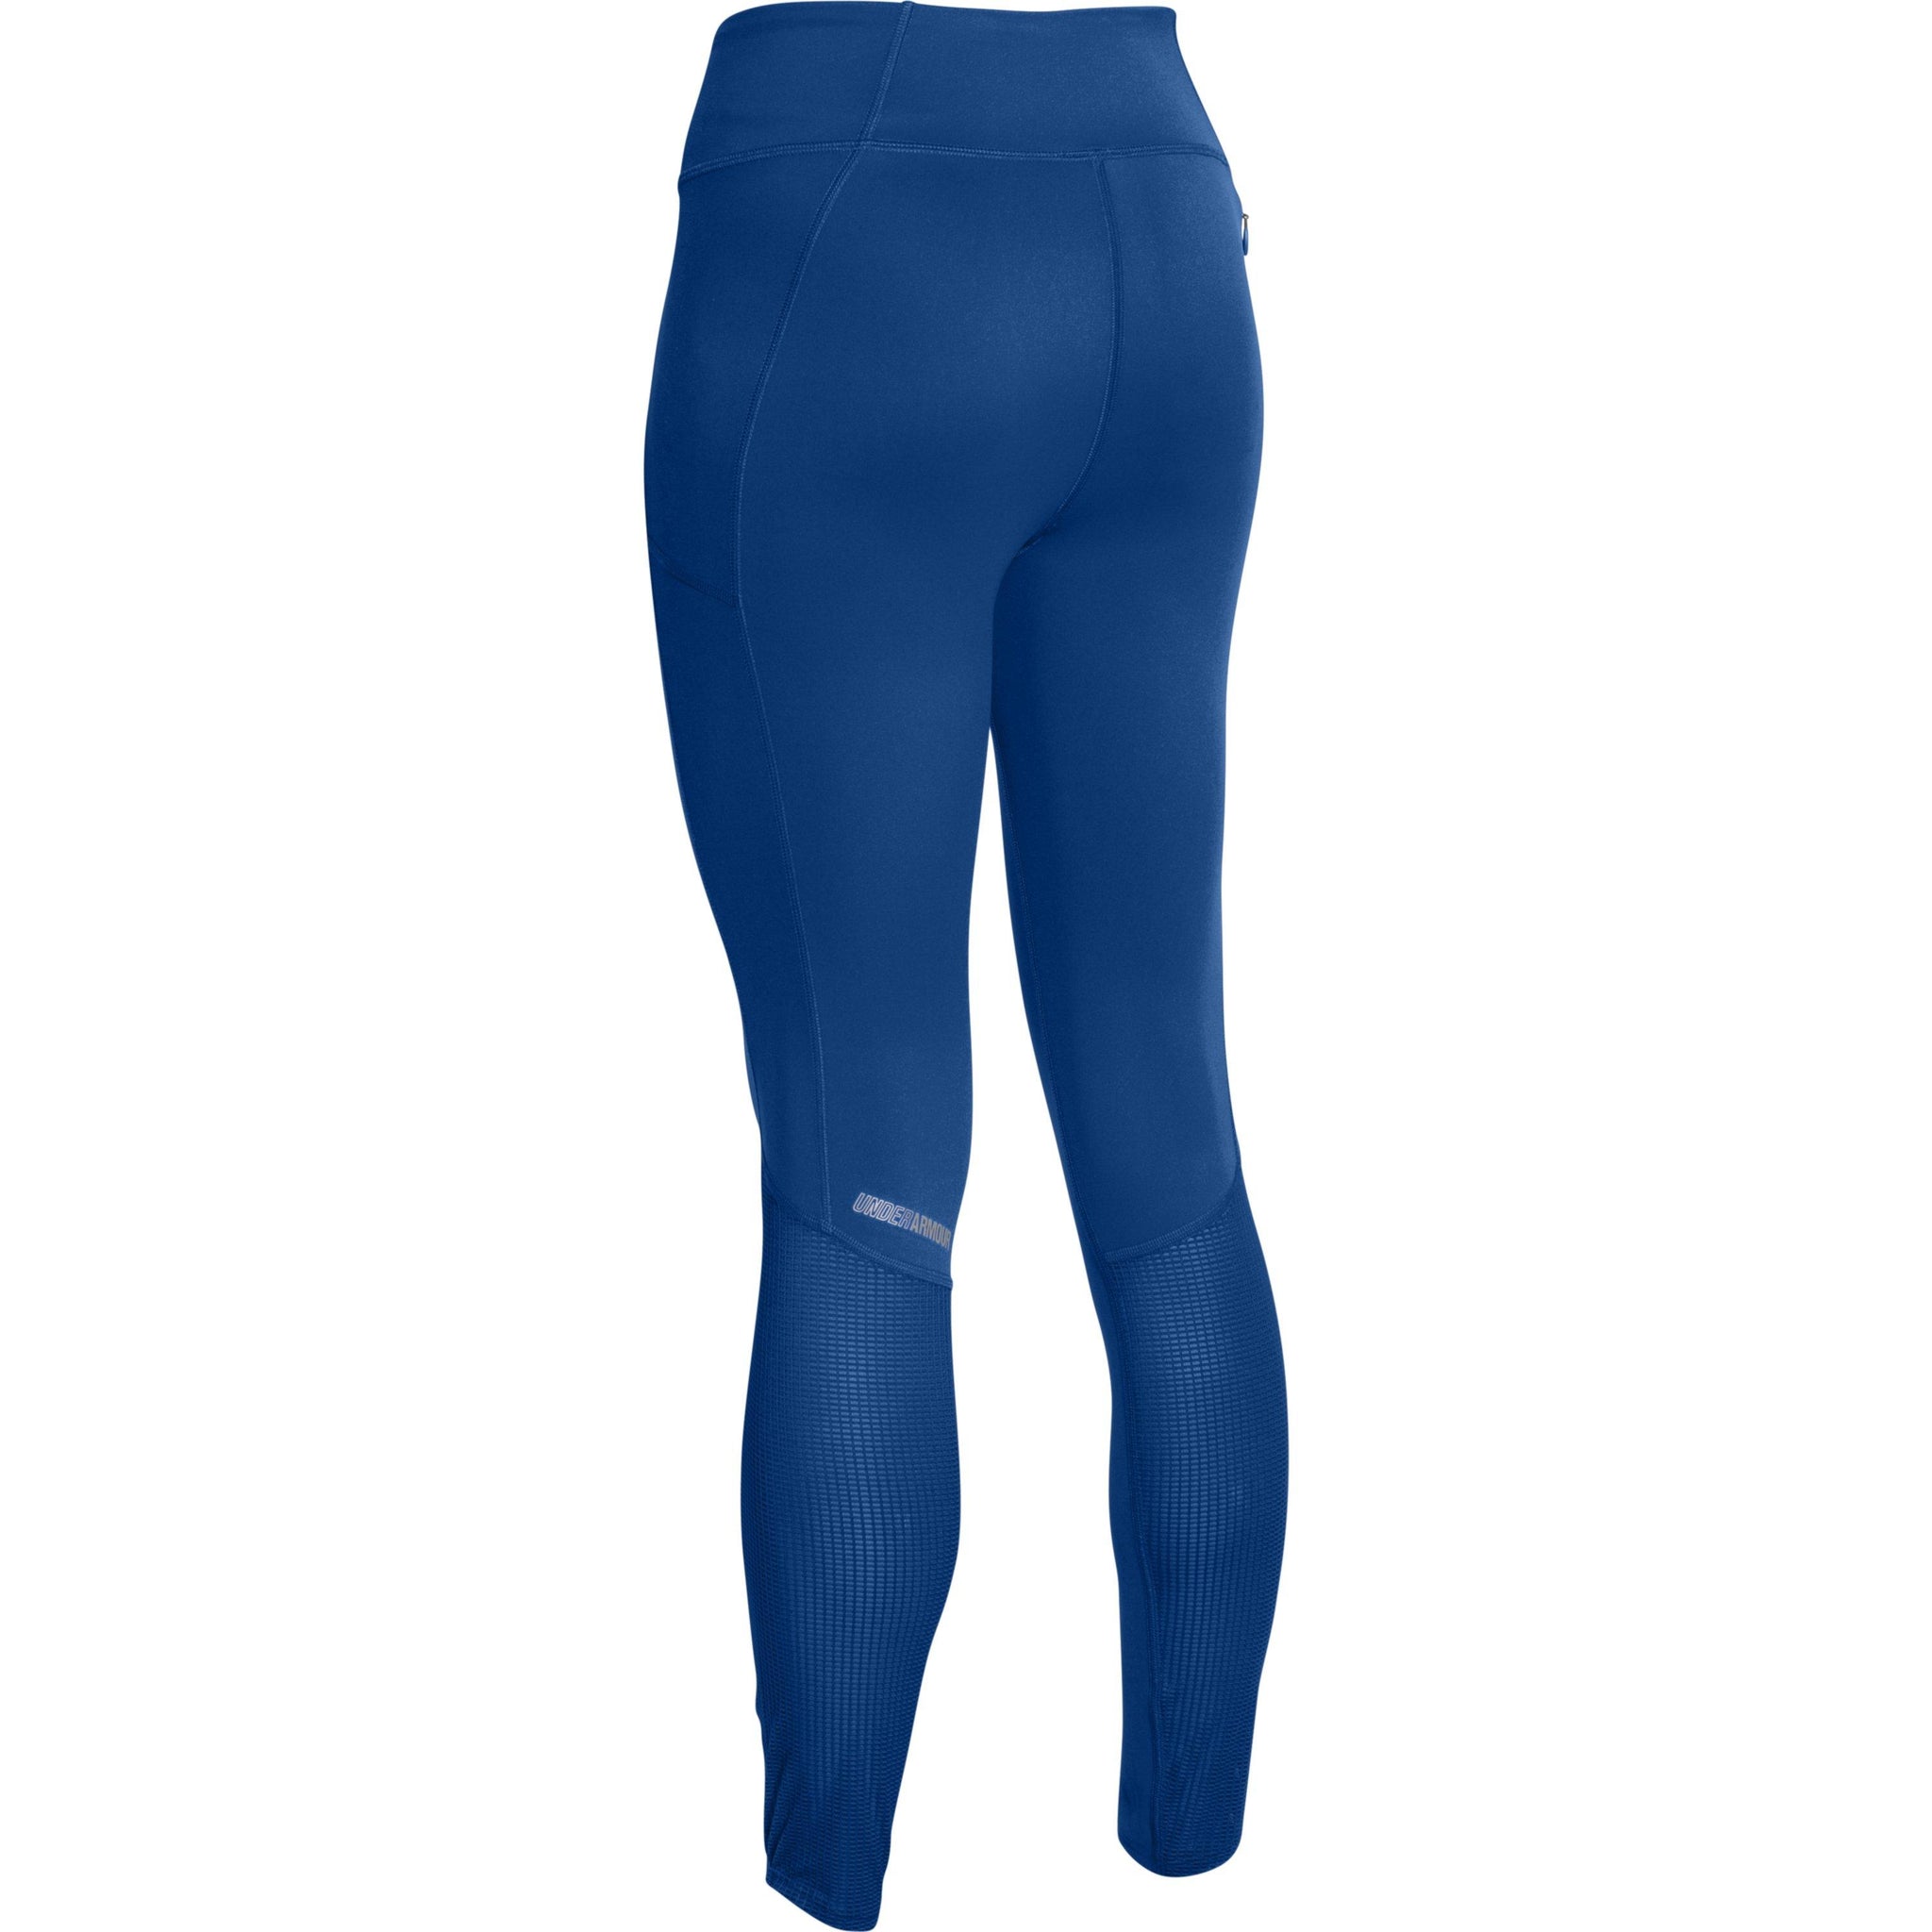 Womens compression 7/8 leggings Under Armour ARMOUR BRANDED WB LEG W blue